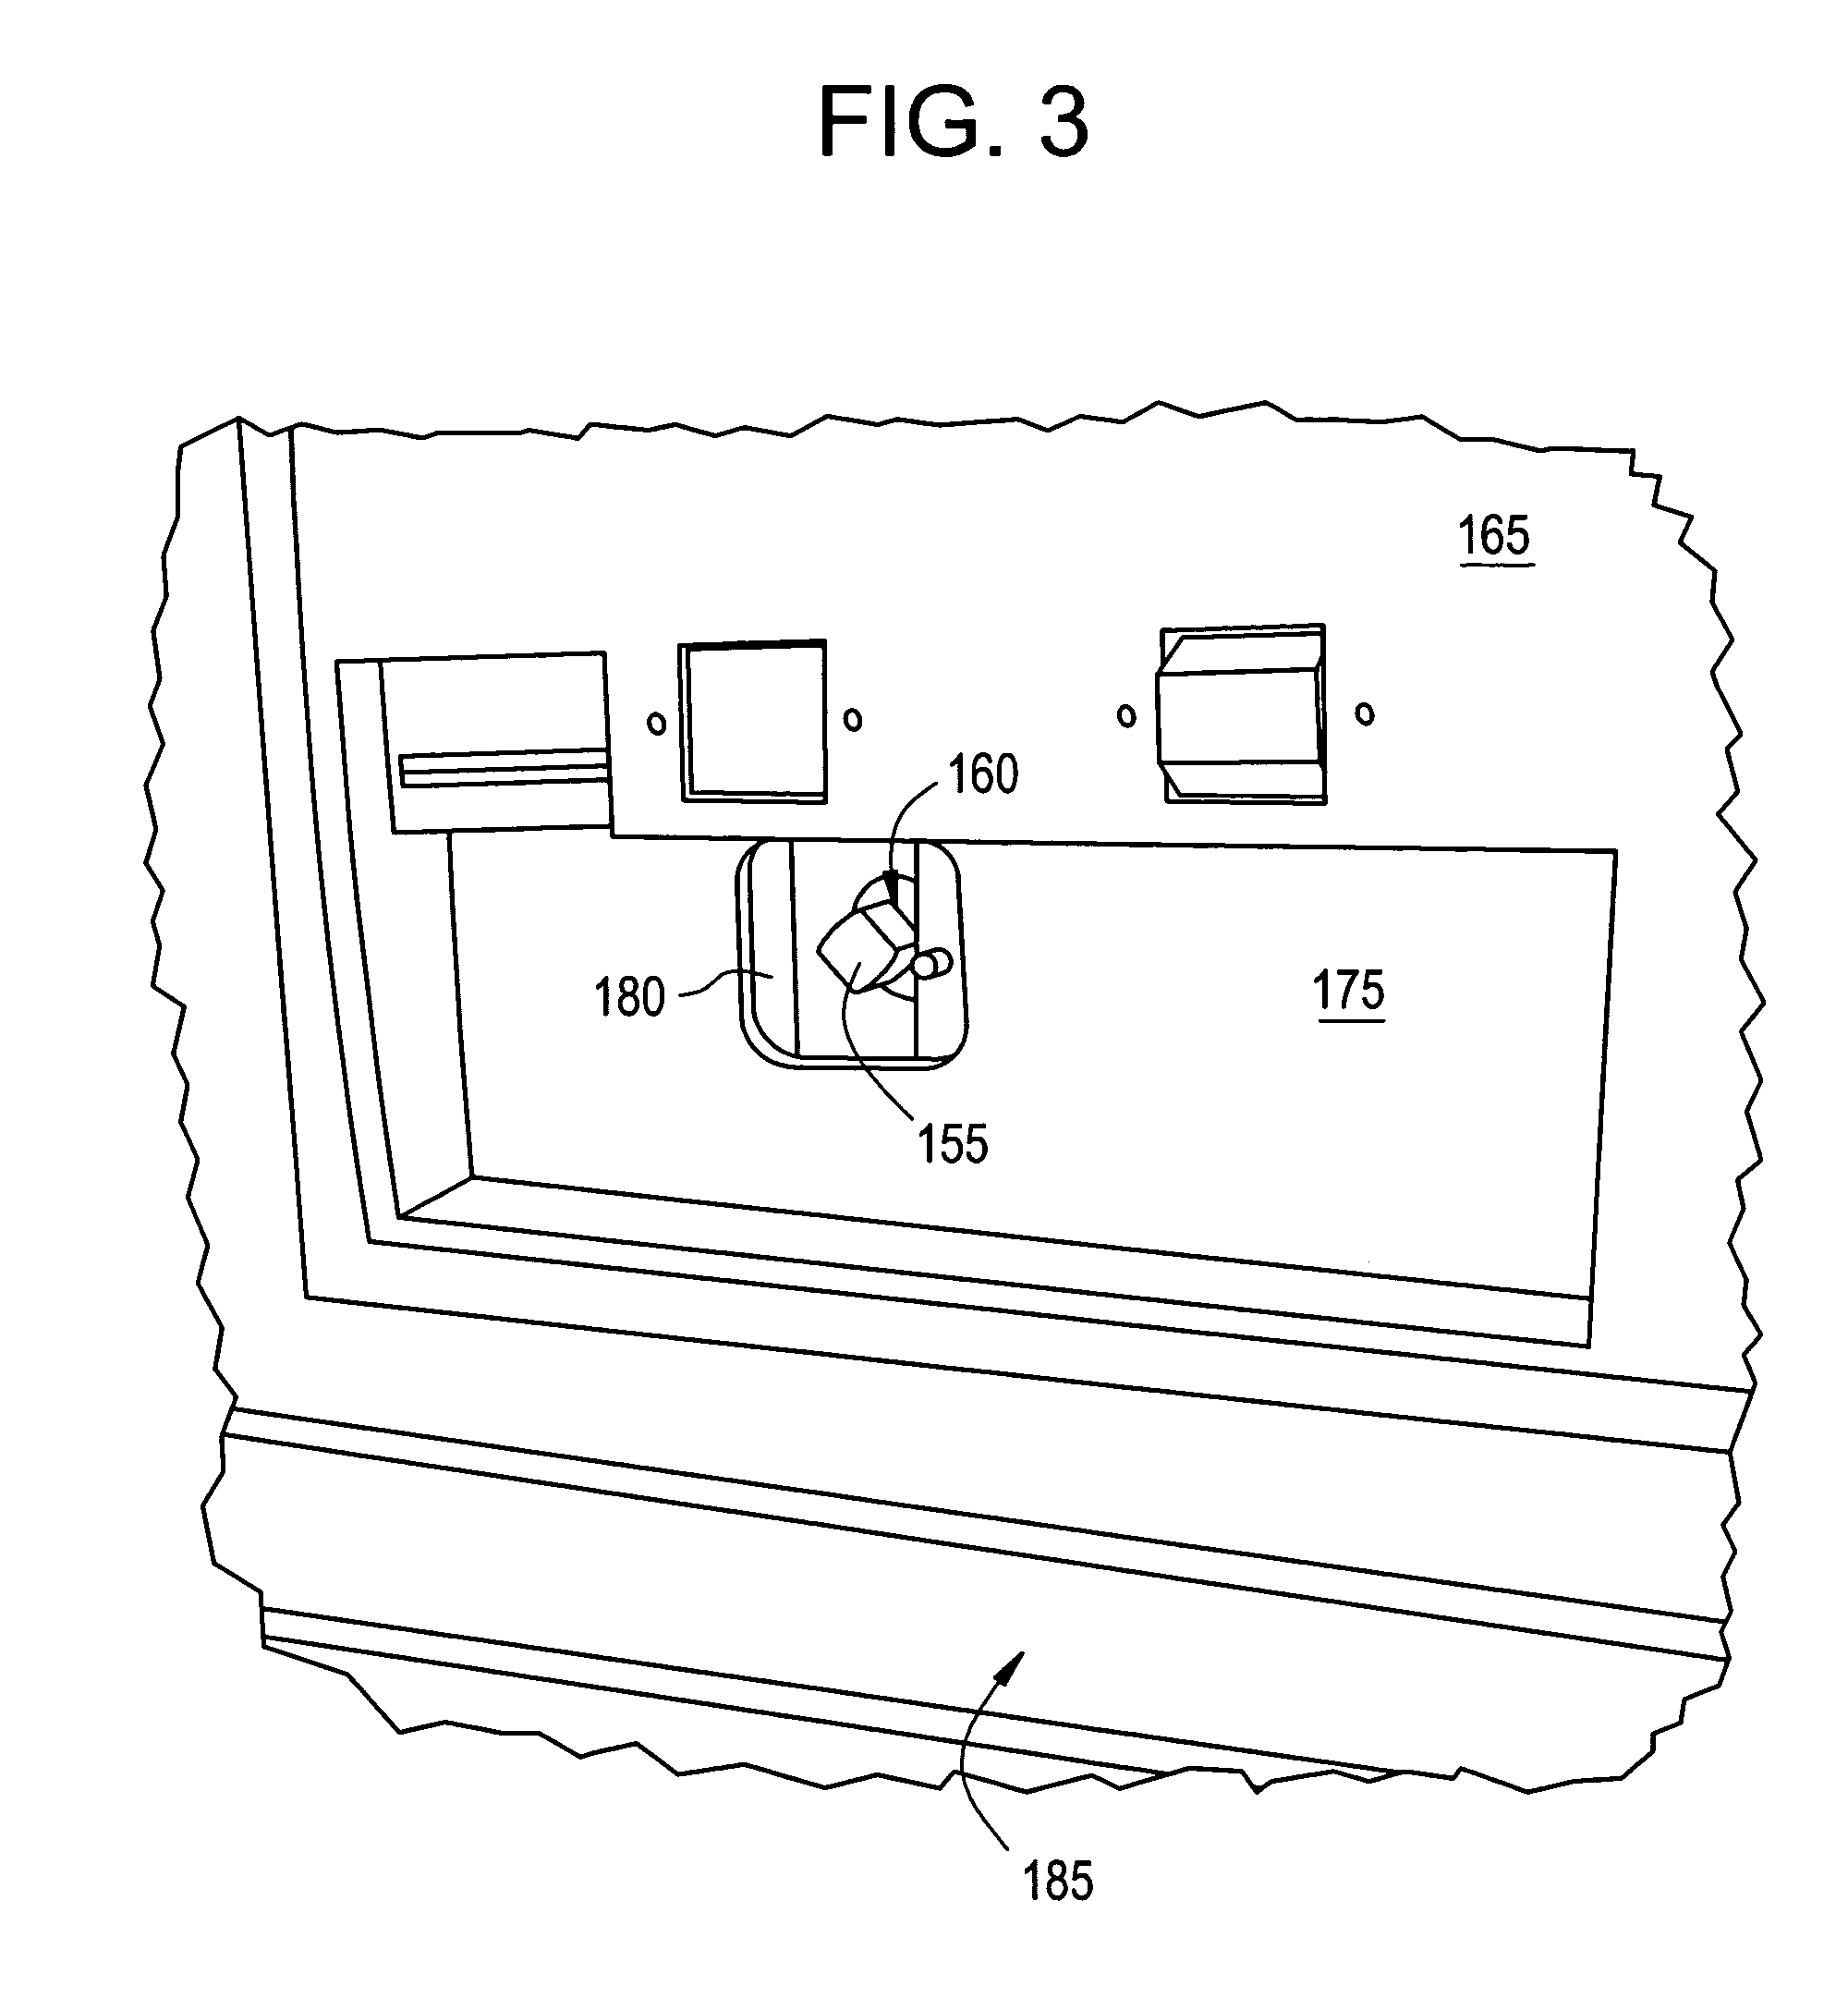 Apparatus for racking circuit breakers into and out of switchgear